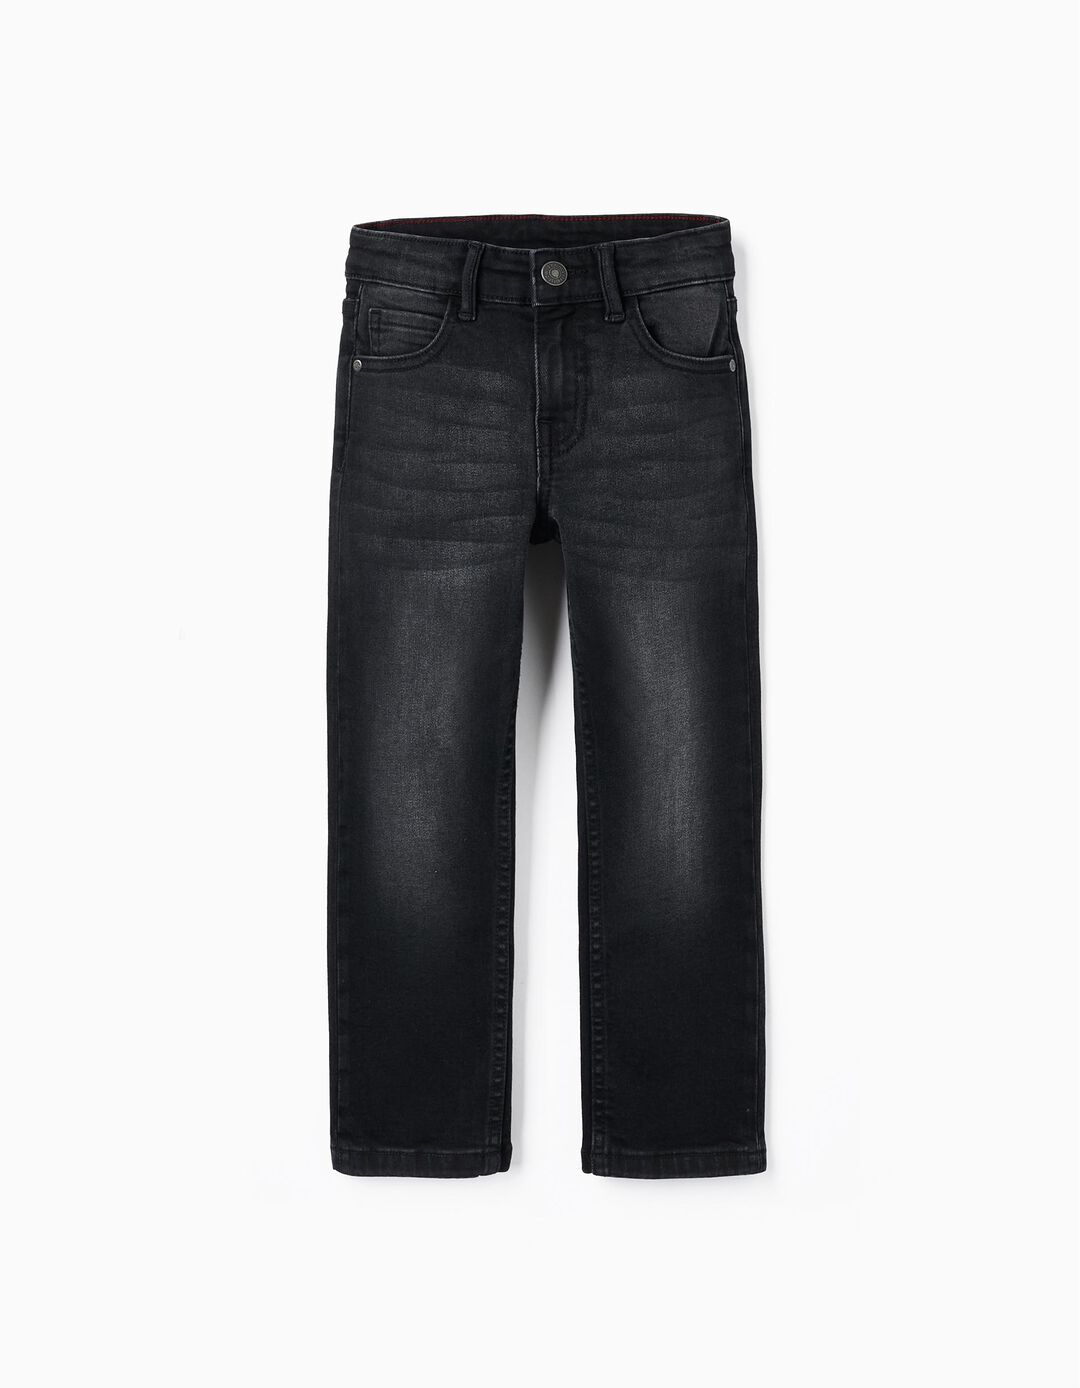 Straight Fit Jeans for Boys, Black